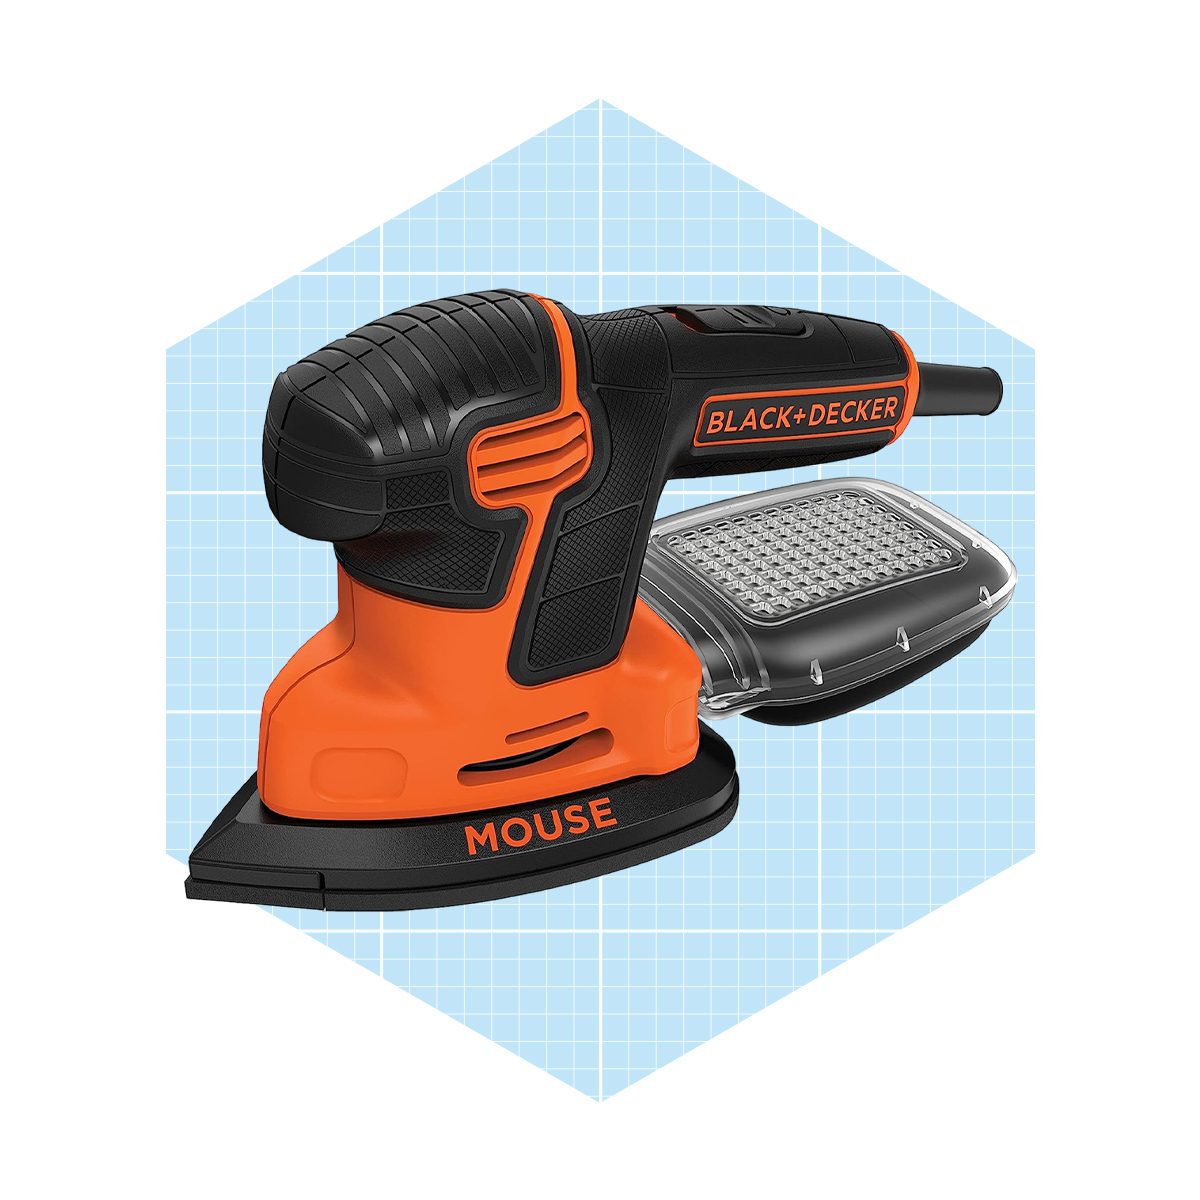 This Black And Decker Toolkit Is 50% Off For Prime Day